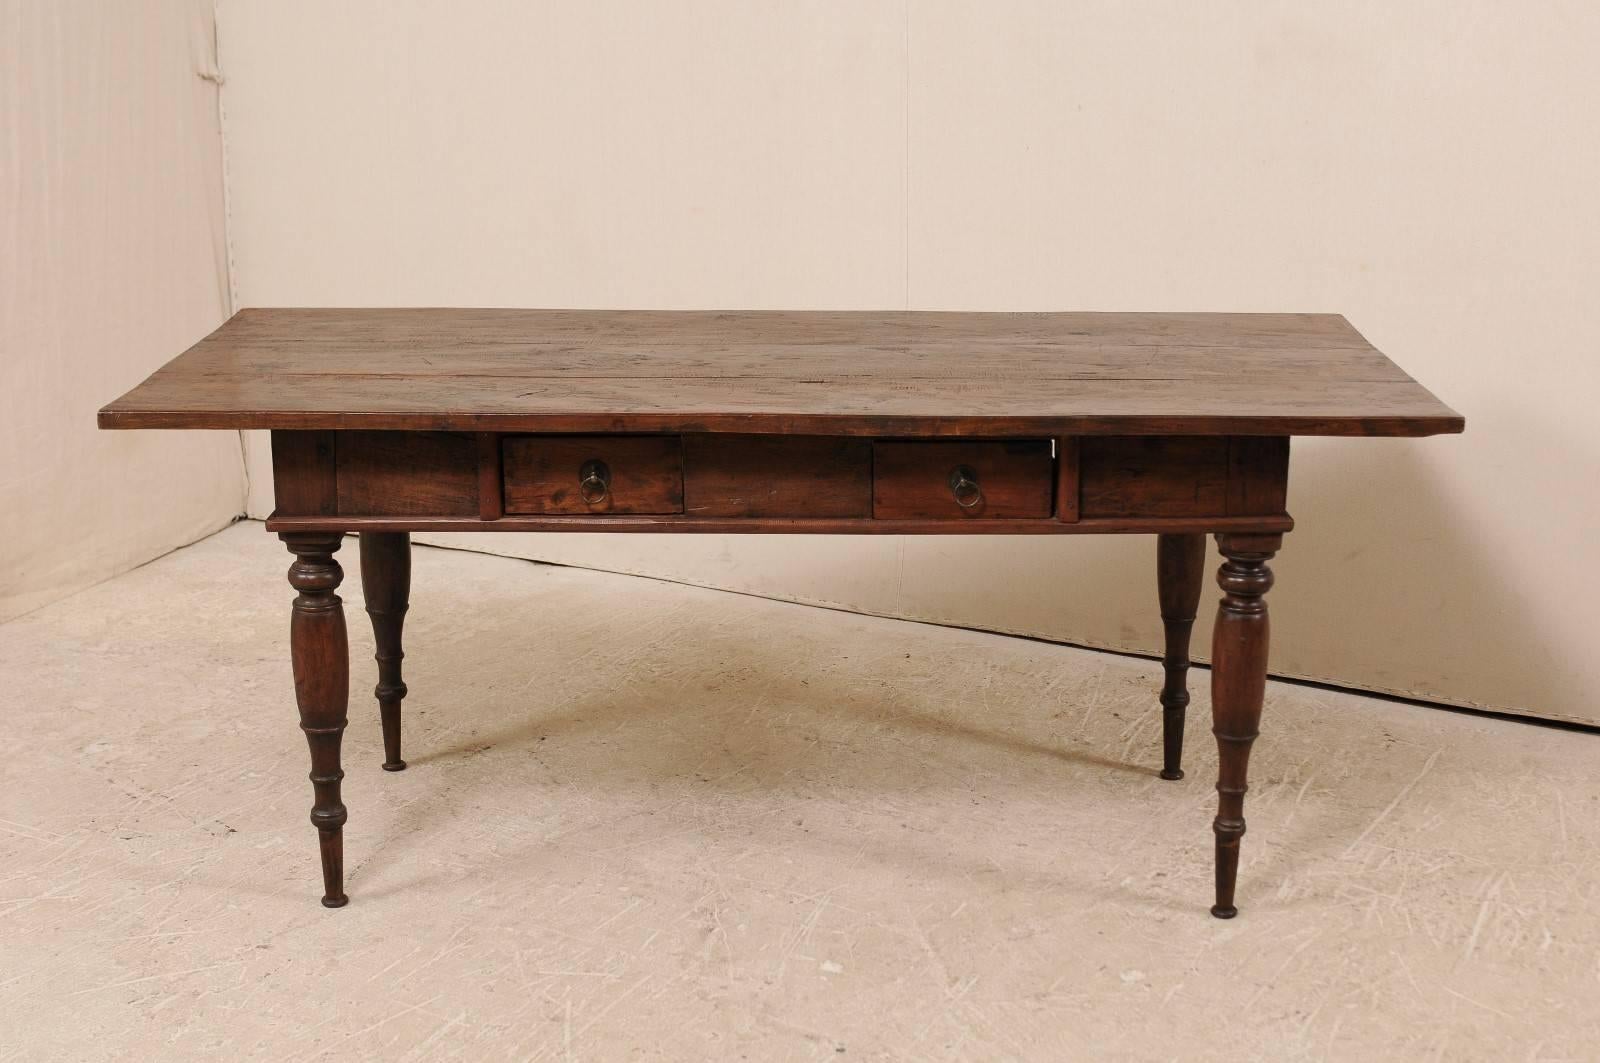 Carved Brazilian Table from the Early 20th Century of Rich Brown Wood with Two Drawers